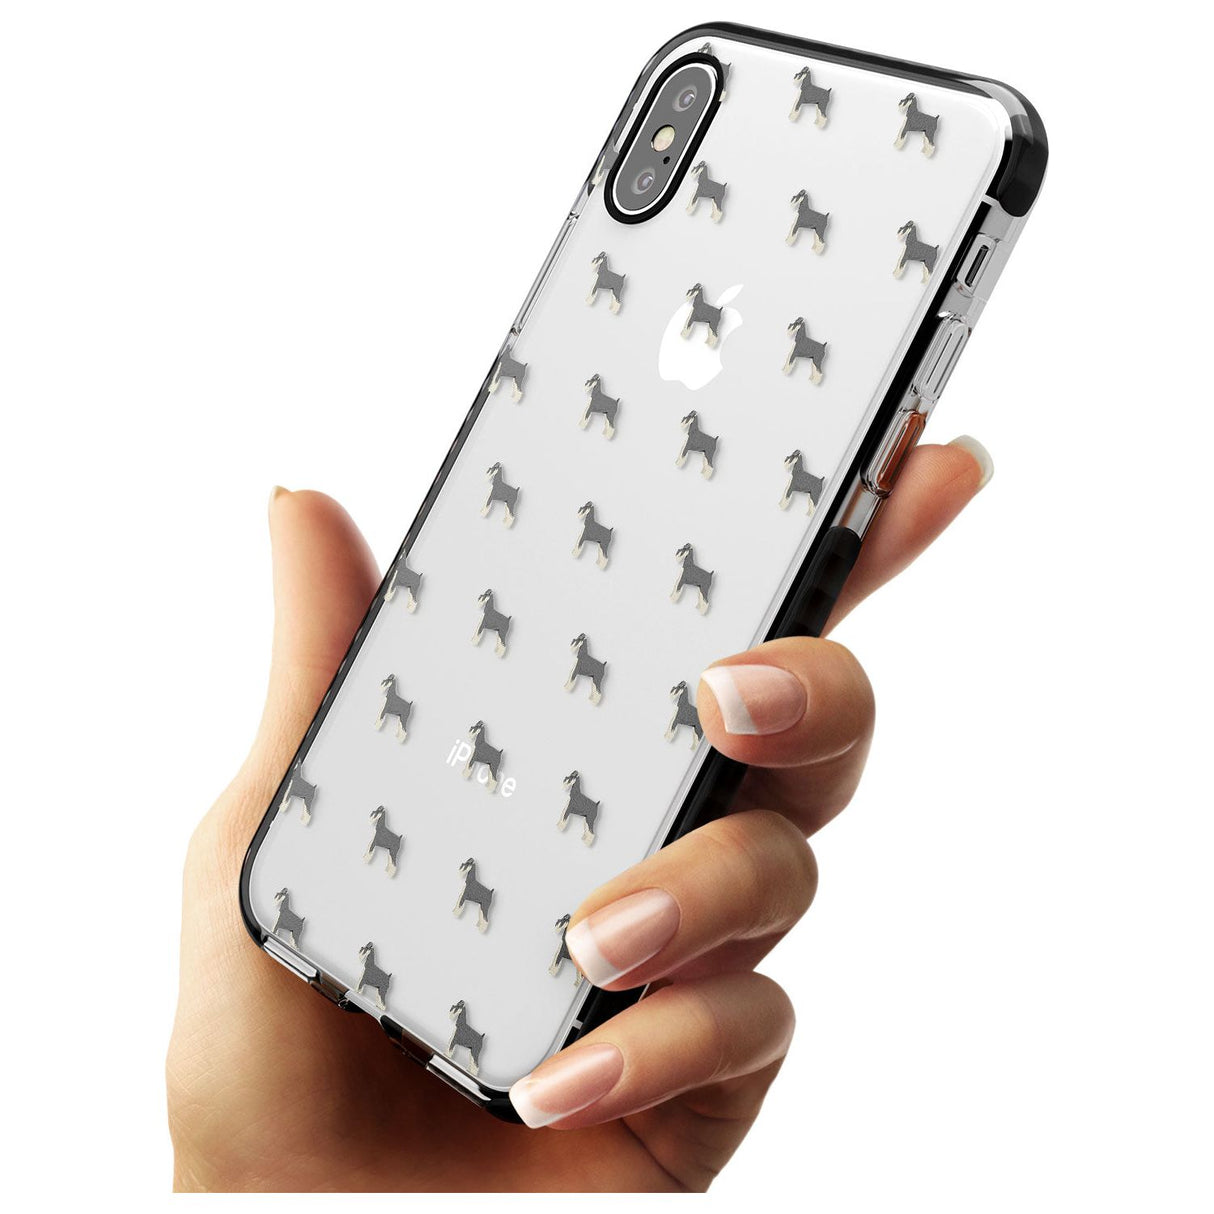 Schnauzer Dog Pattern Clear Black Impact Phone Case for iPhone X XS Max XR